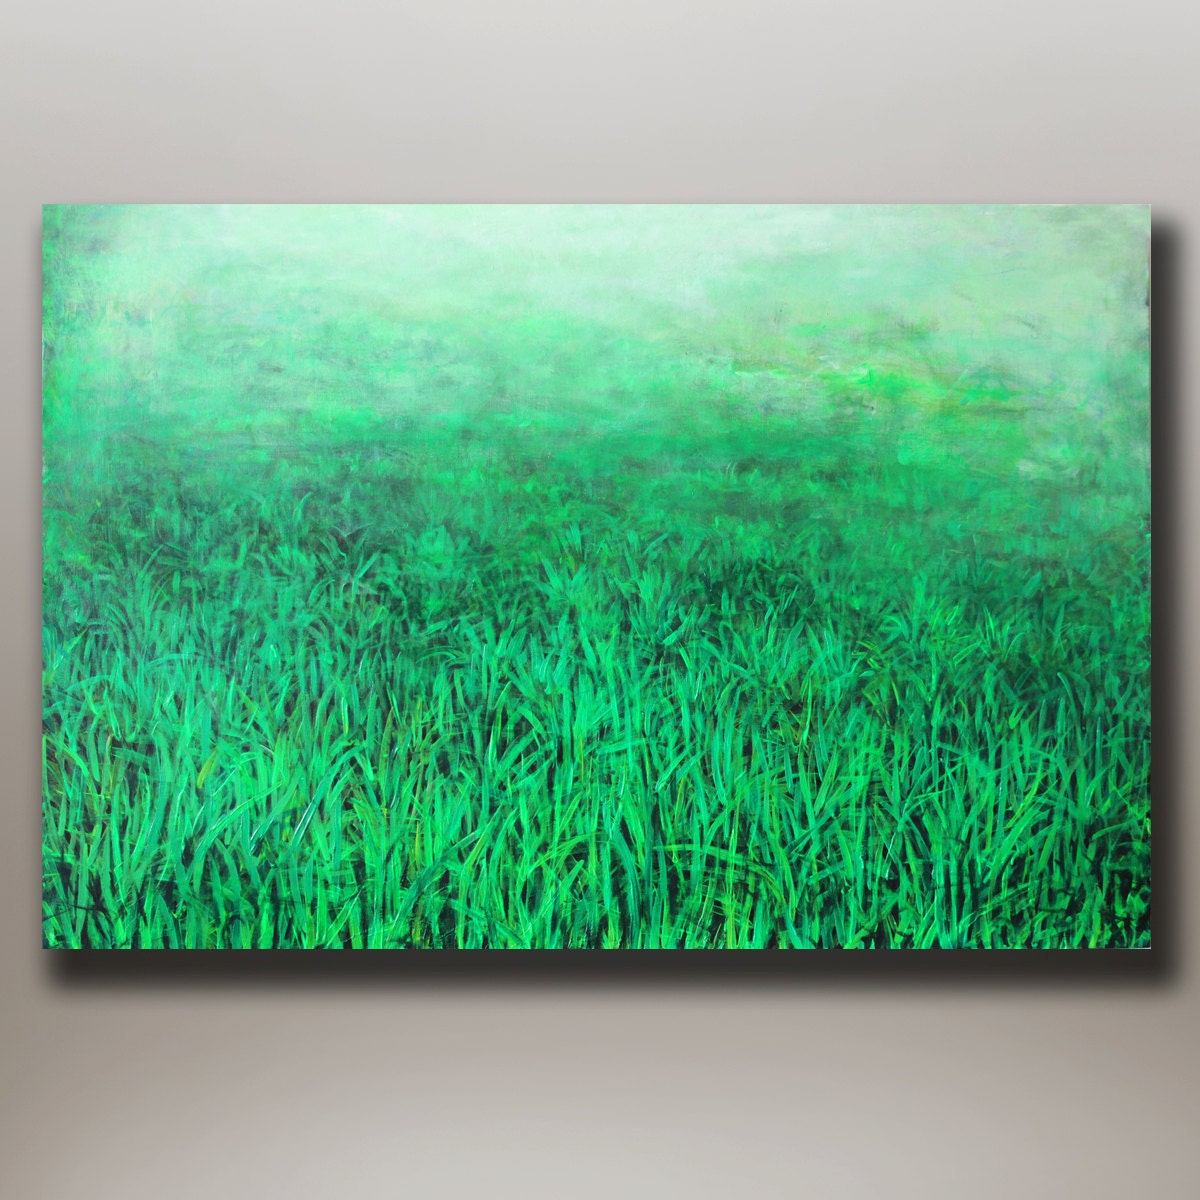 Acrylic grasses ORIGINAL 24x36 by ABSTRACT Green  PAINTING Grass painting ColorMind